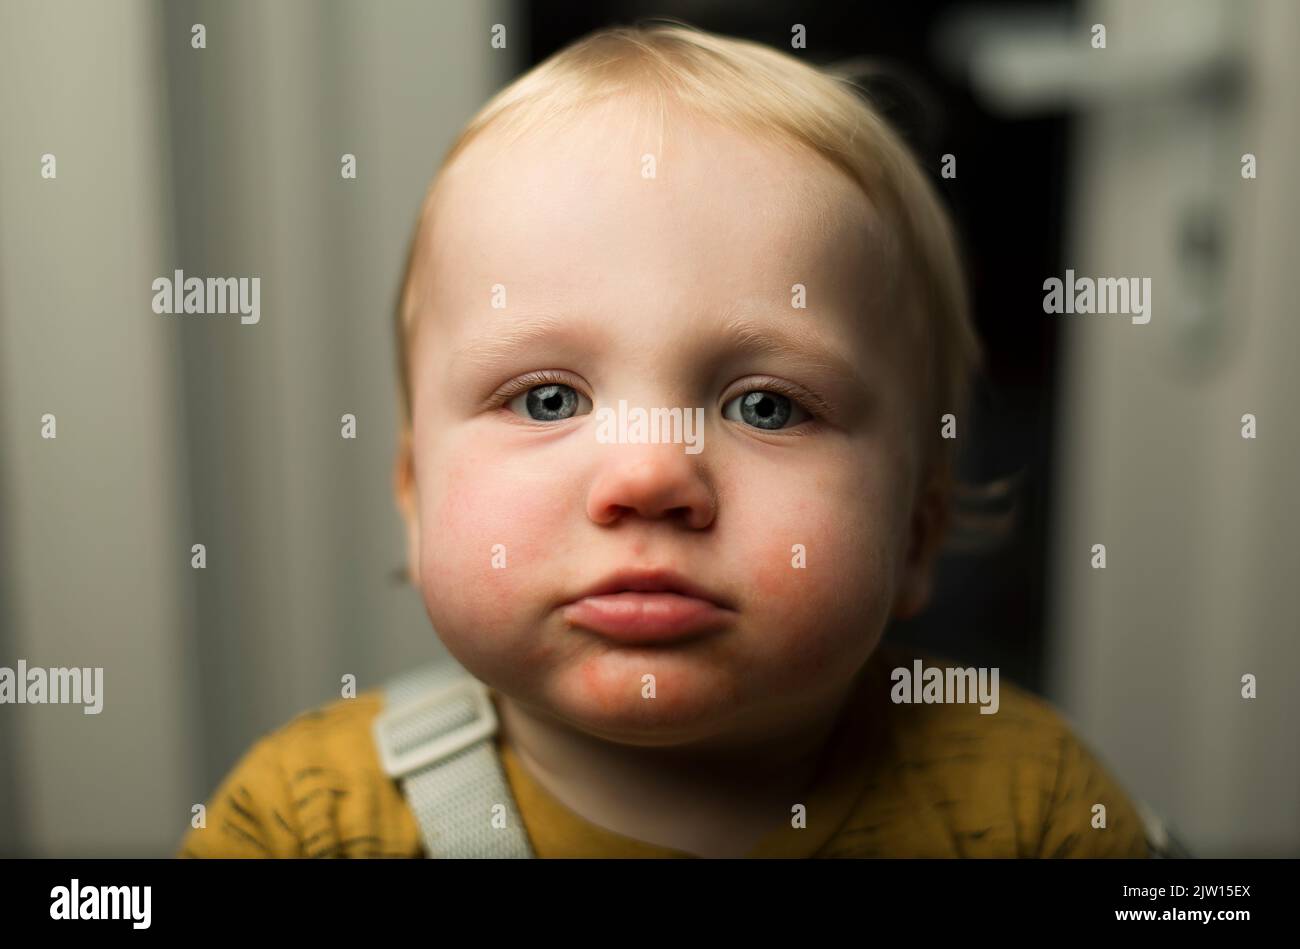 Little blonde boy giving an on look into the camera. Stock Photo